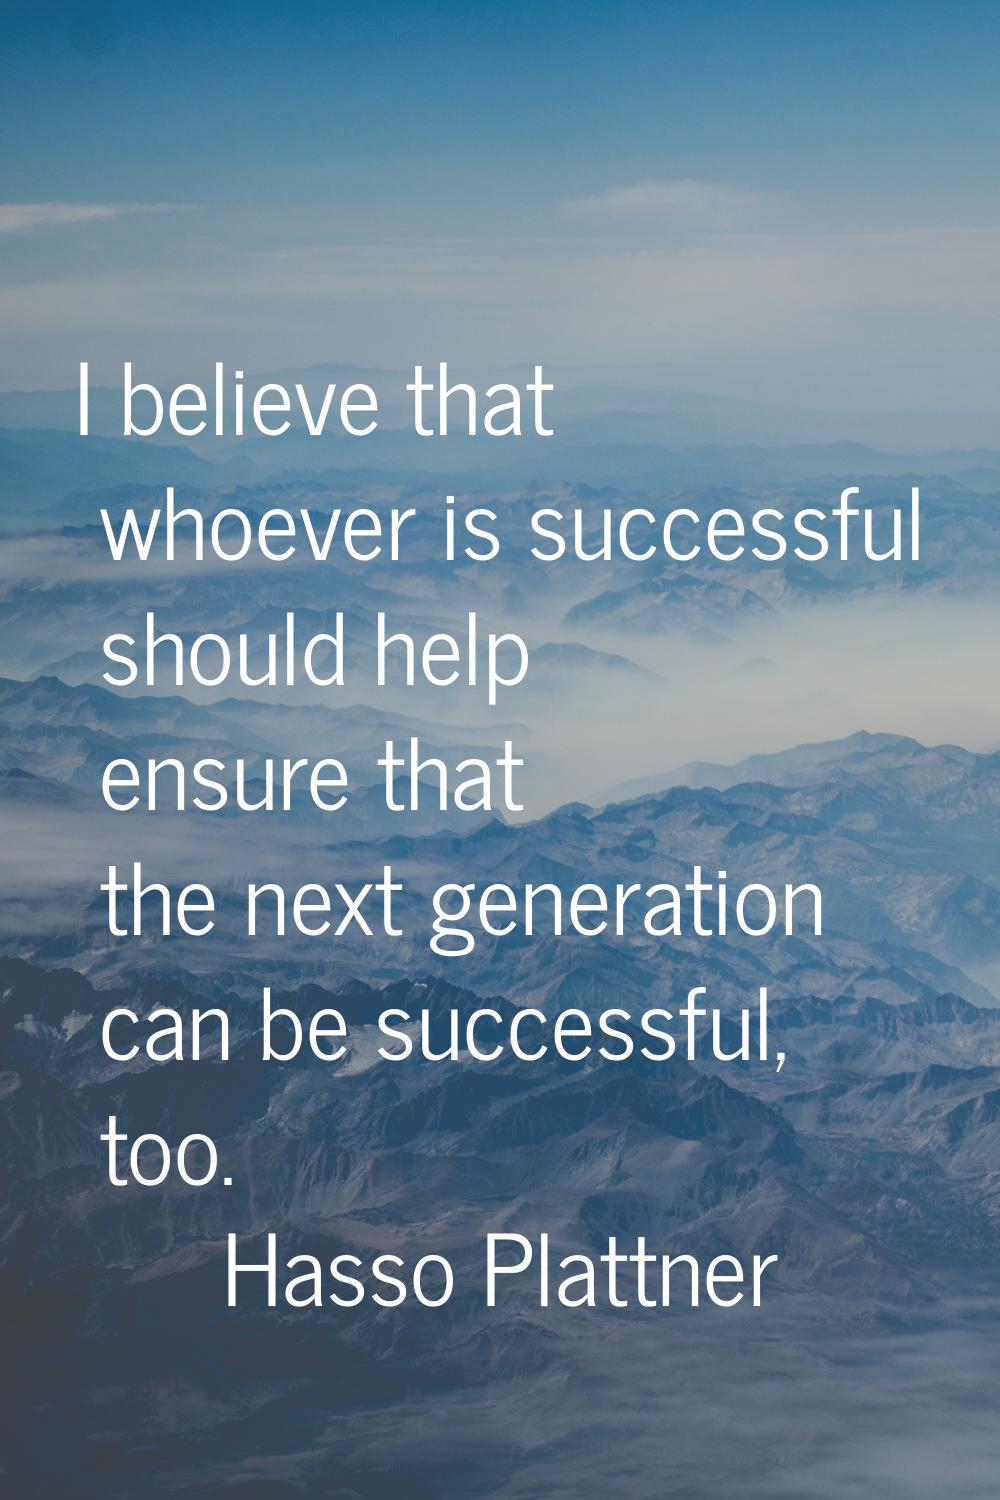 I believe that whoever is successful should help ensure that the next generation can be successful,